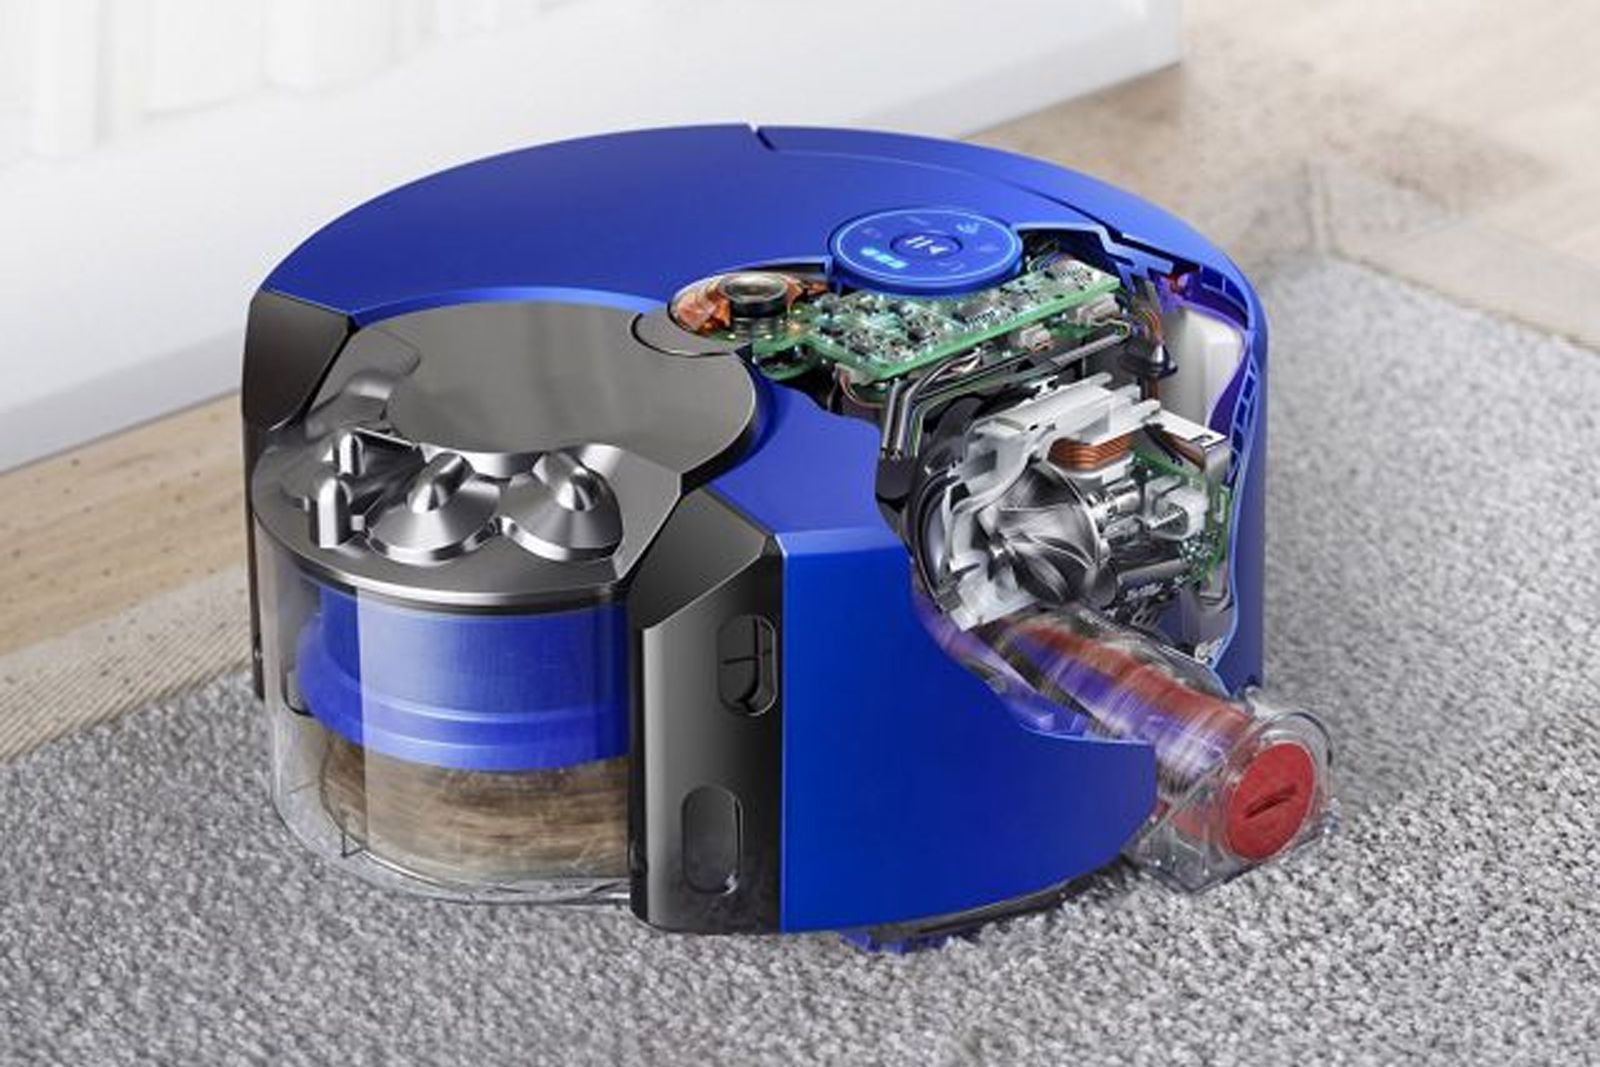 Dyson 360 Heurist robot vacuum Everything you need to know image 1